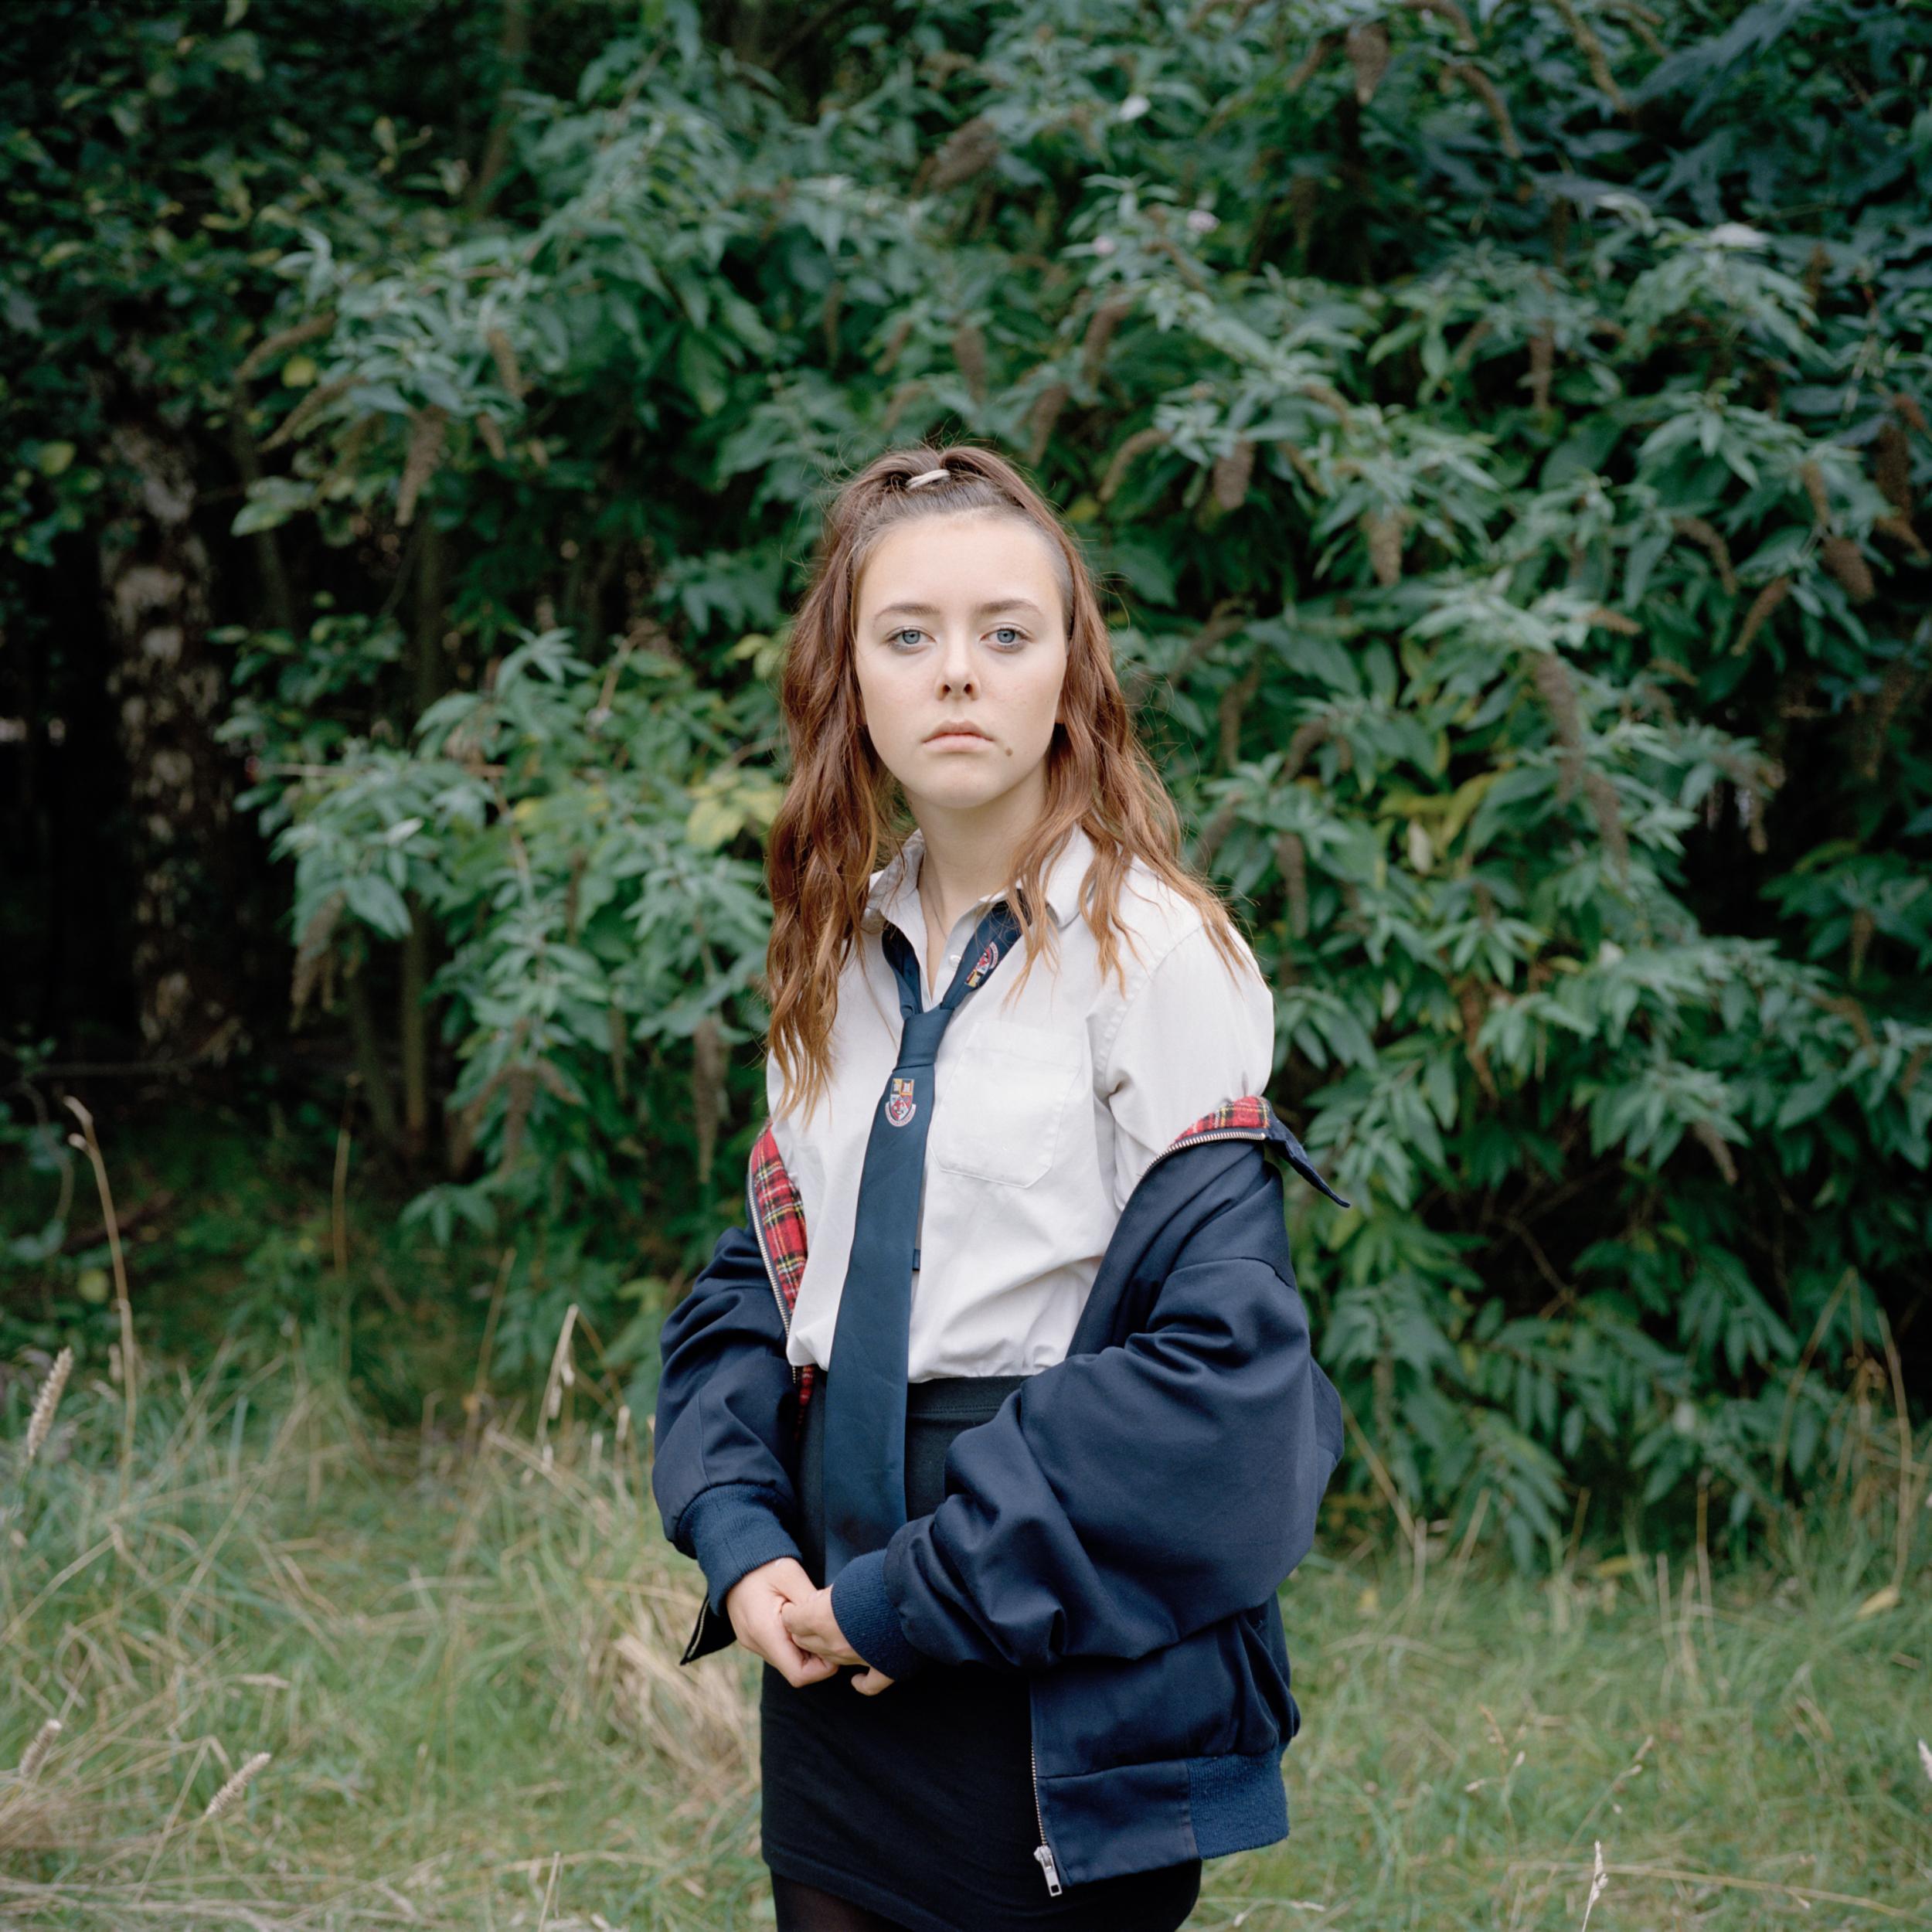 The portraits exploring concepts of identity in modern Britain